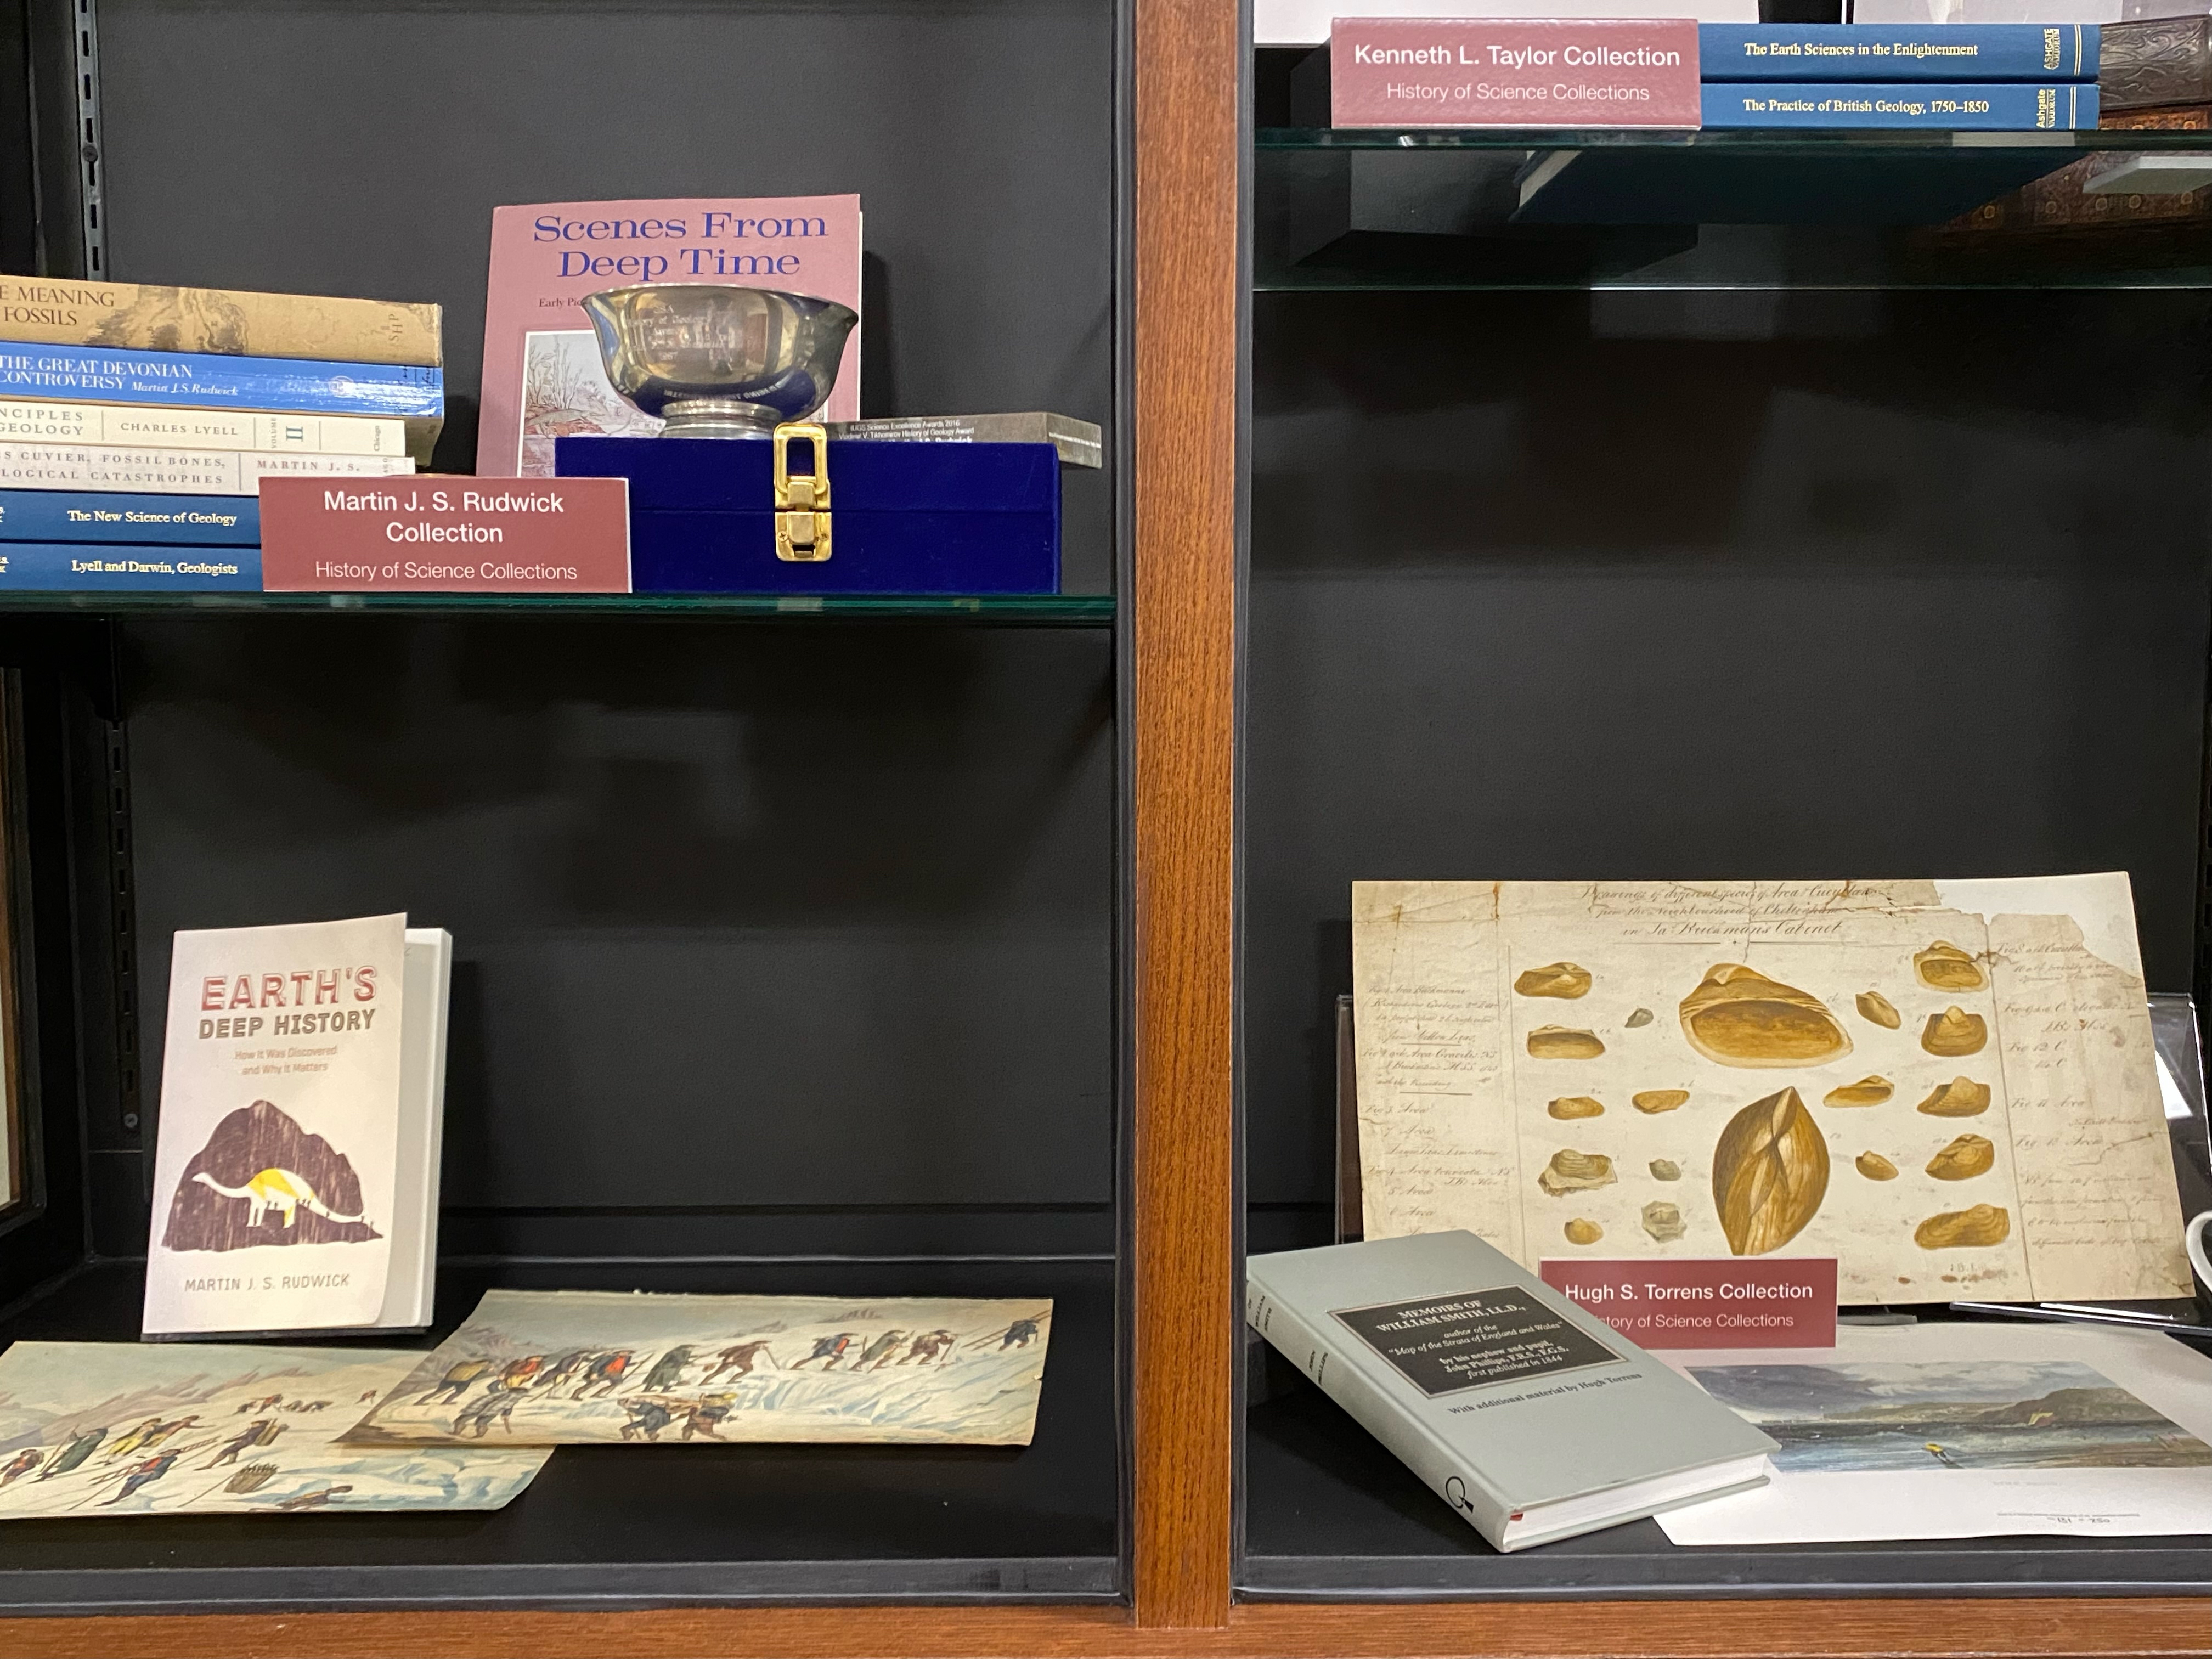 Photo of part of a display of books in the history of geology, with signs for three named collections: Martin J. S. Rudwick, Kenneth L. Taylor, and Hugh S. Torrens.